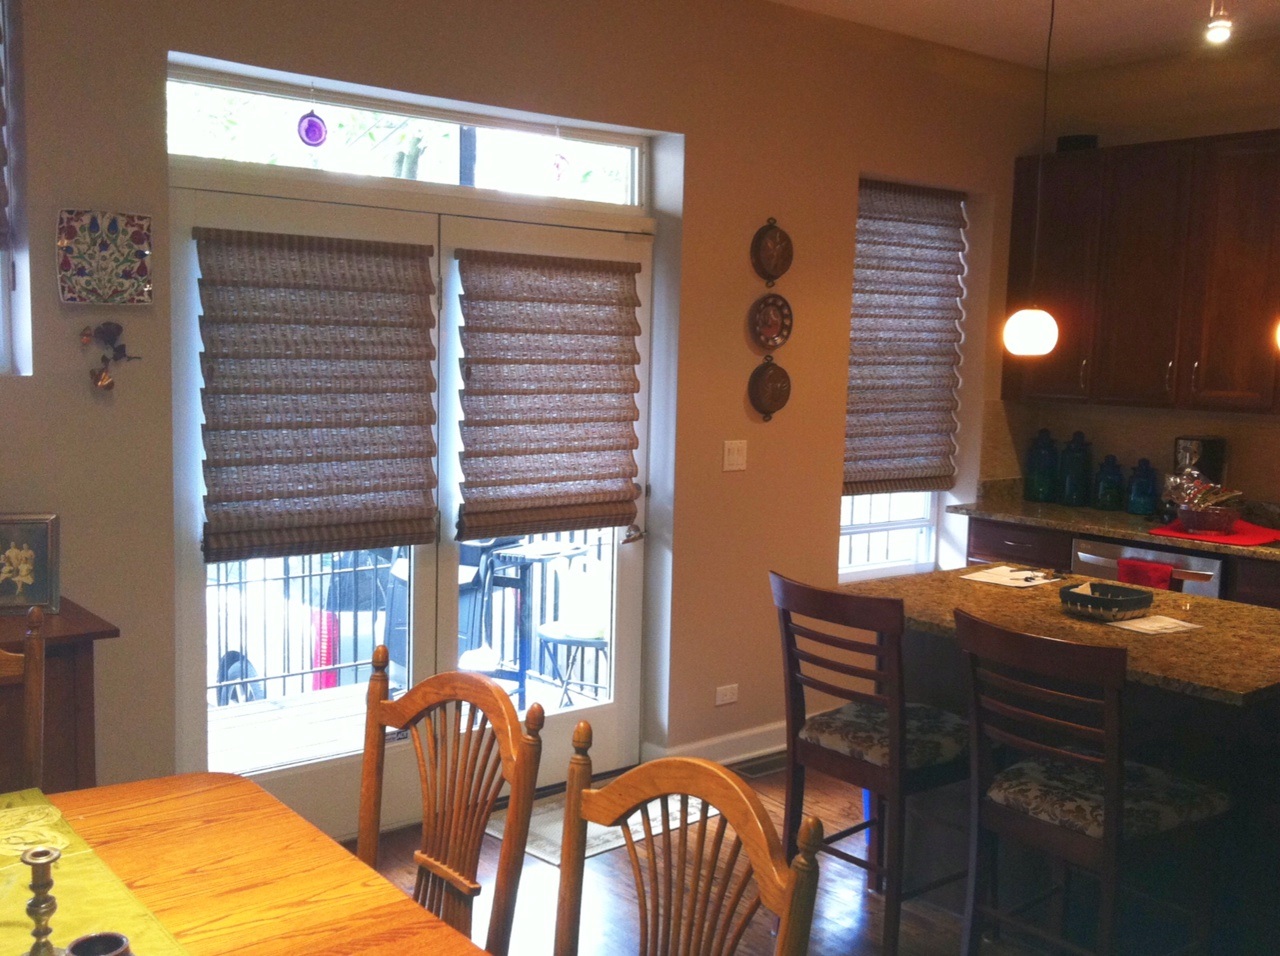 Vignette Modern Roman Shades with a natural textured fabric